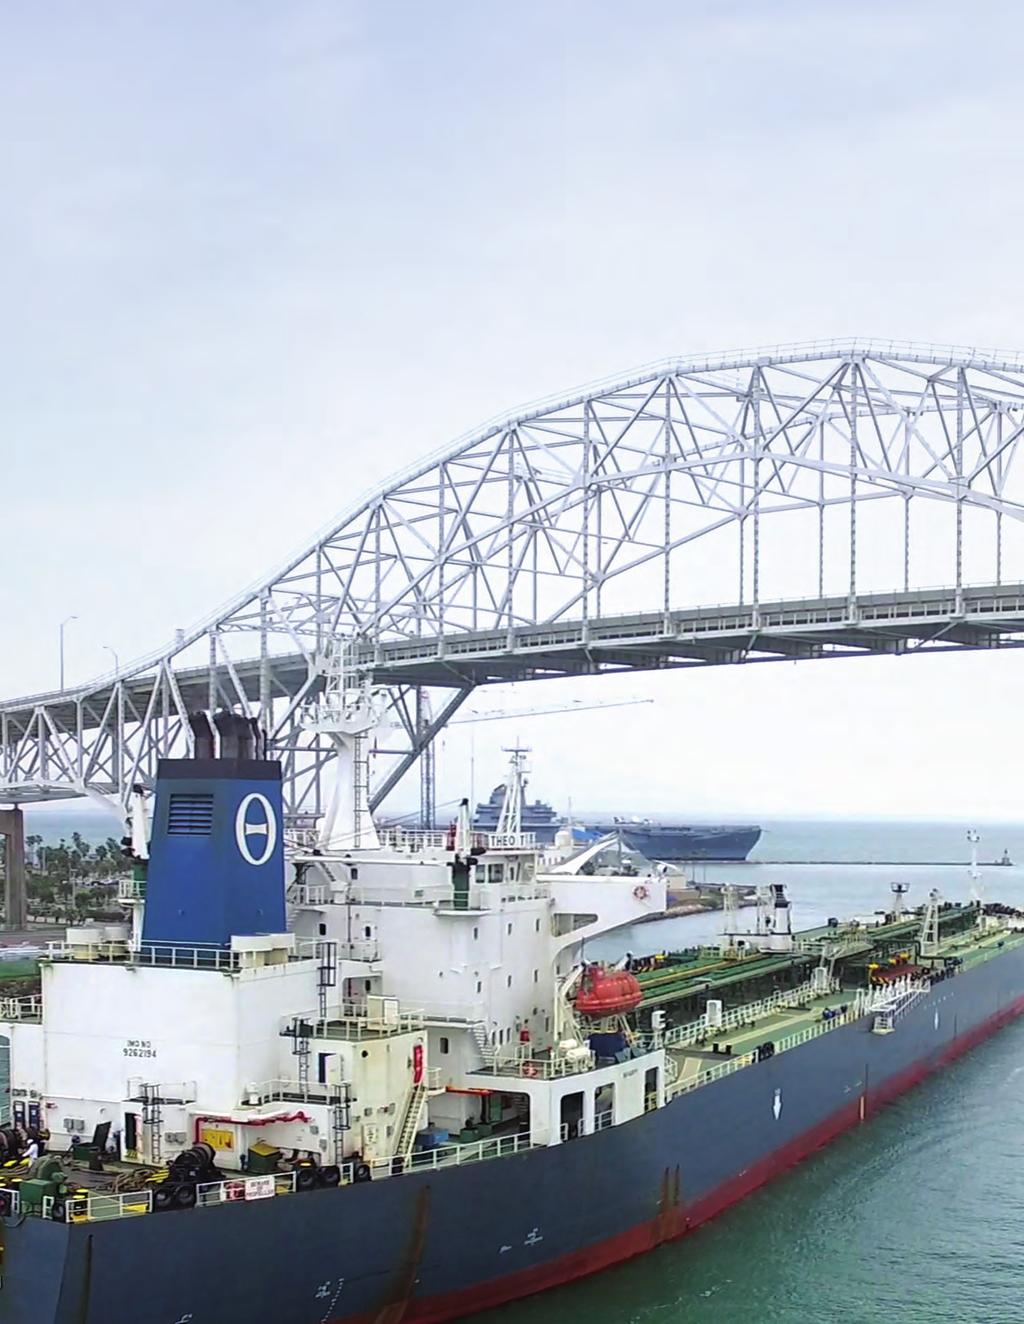 CORPUS CHRISTI IFORMATIO & ACTIVITY ROCKPORT TERMIALS LAD AVAILABLE FOR SALE Port Corpus Christi is the fifth largest port in the United States in total tonnage.